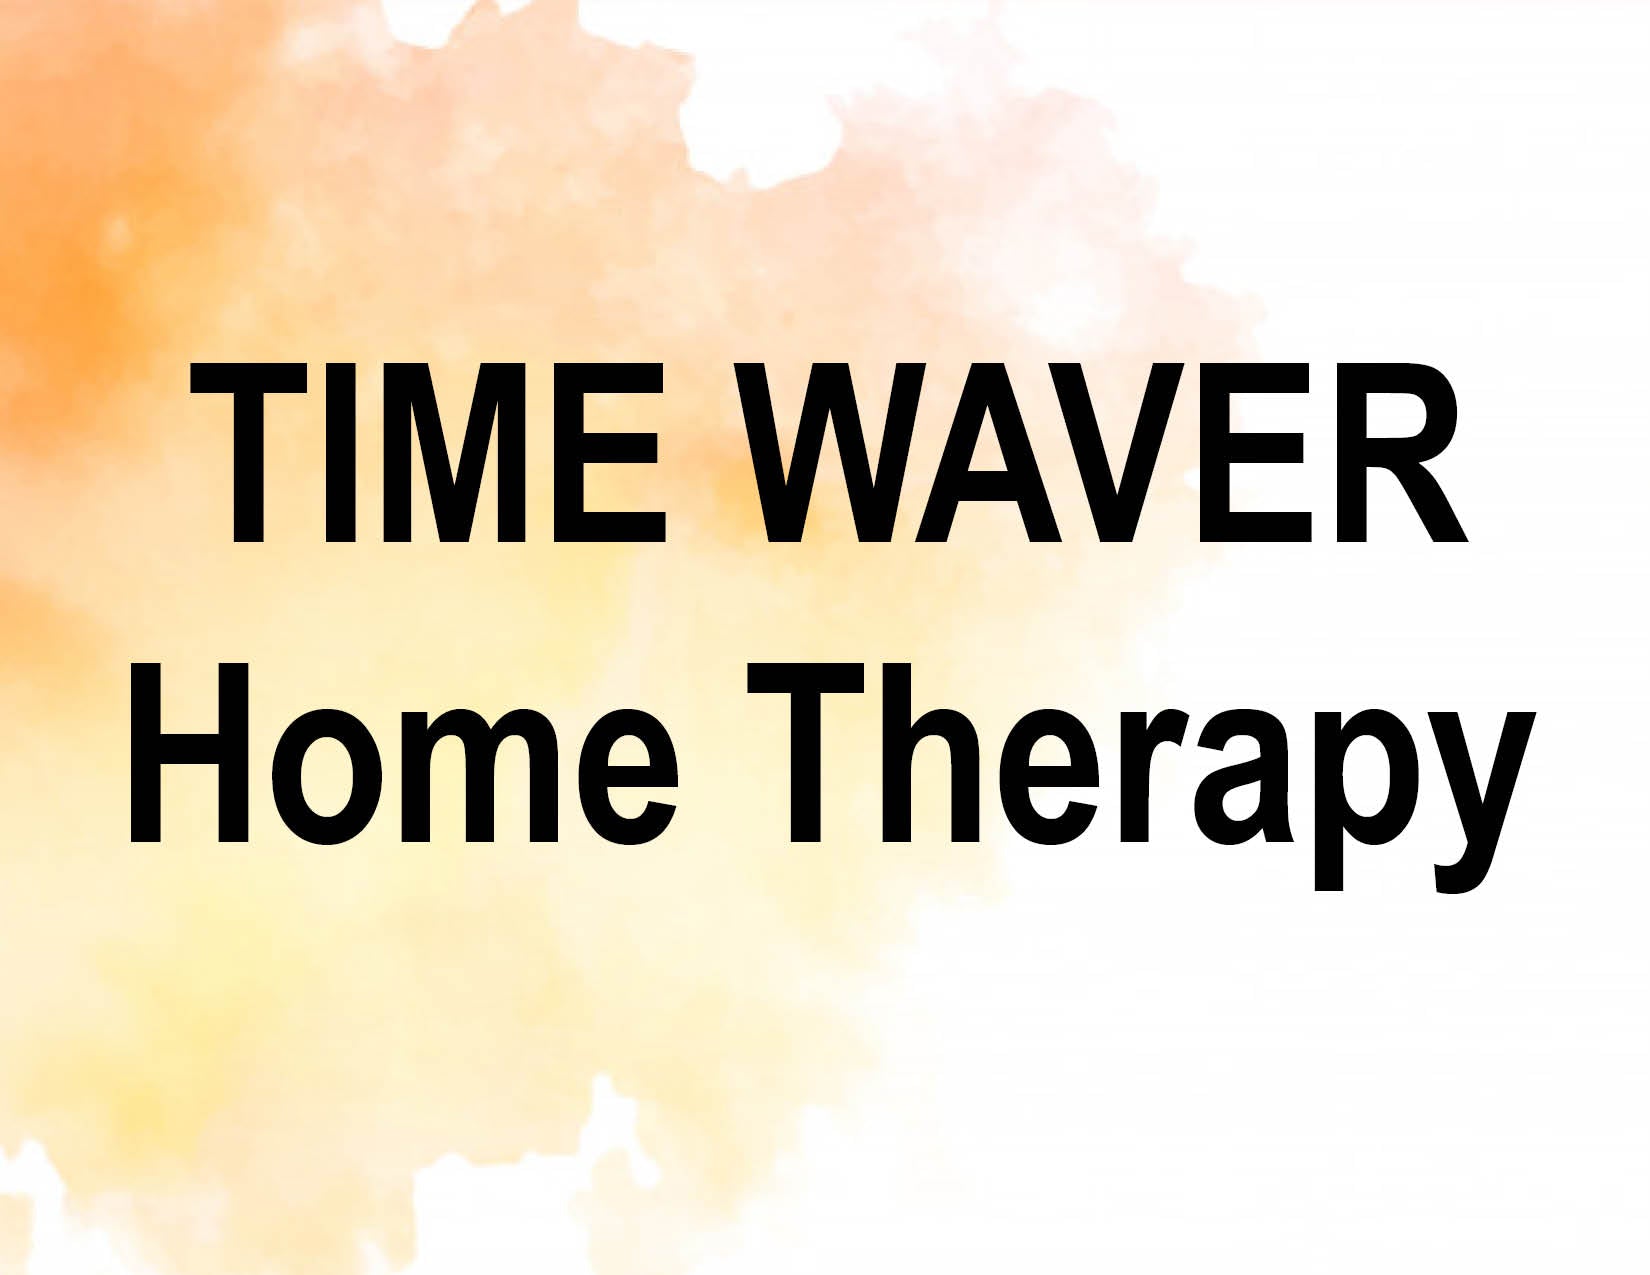 Time Waver Home Therapy